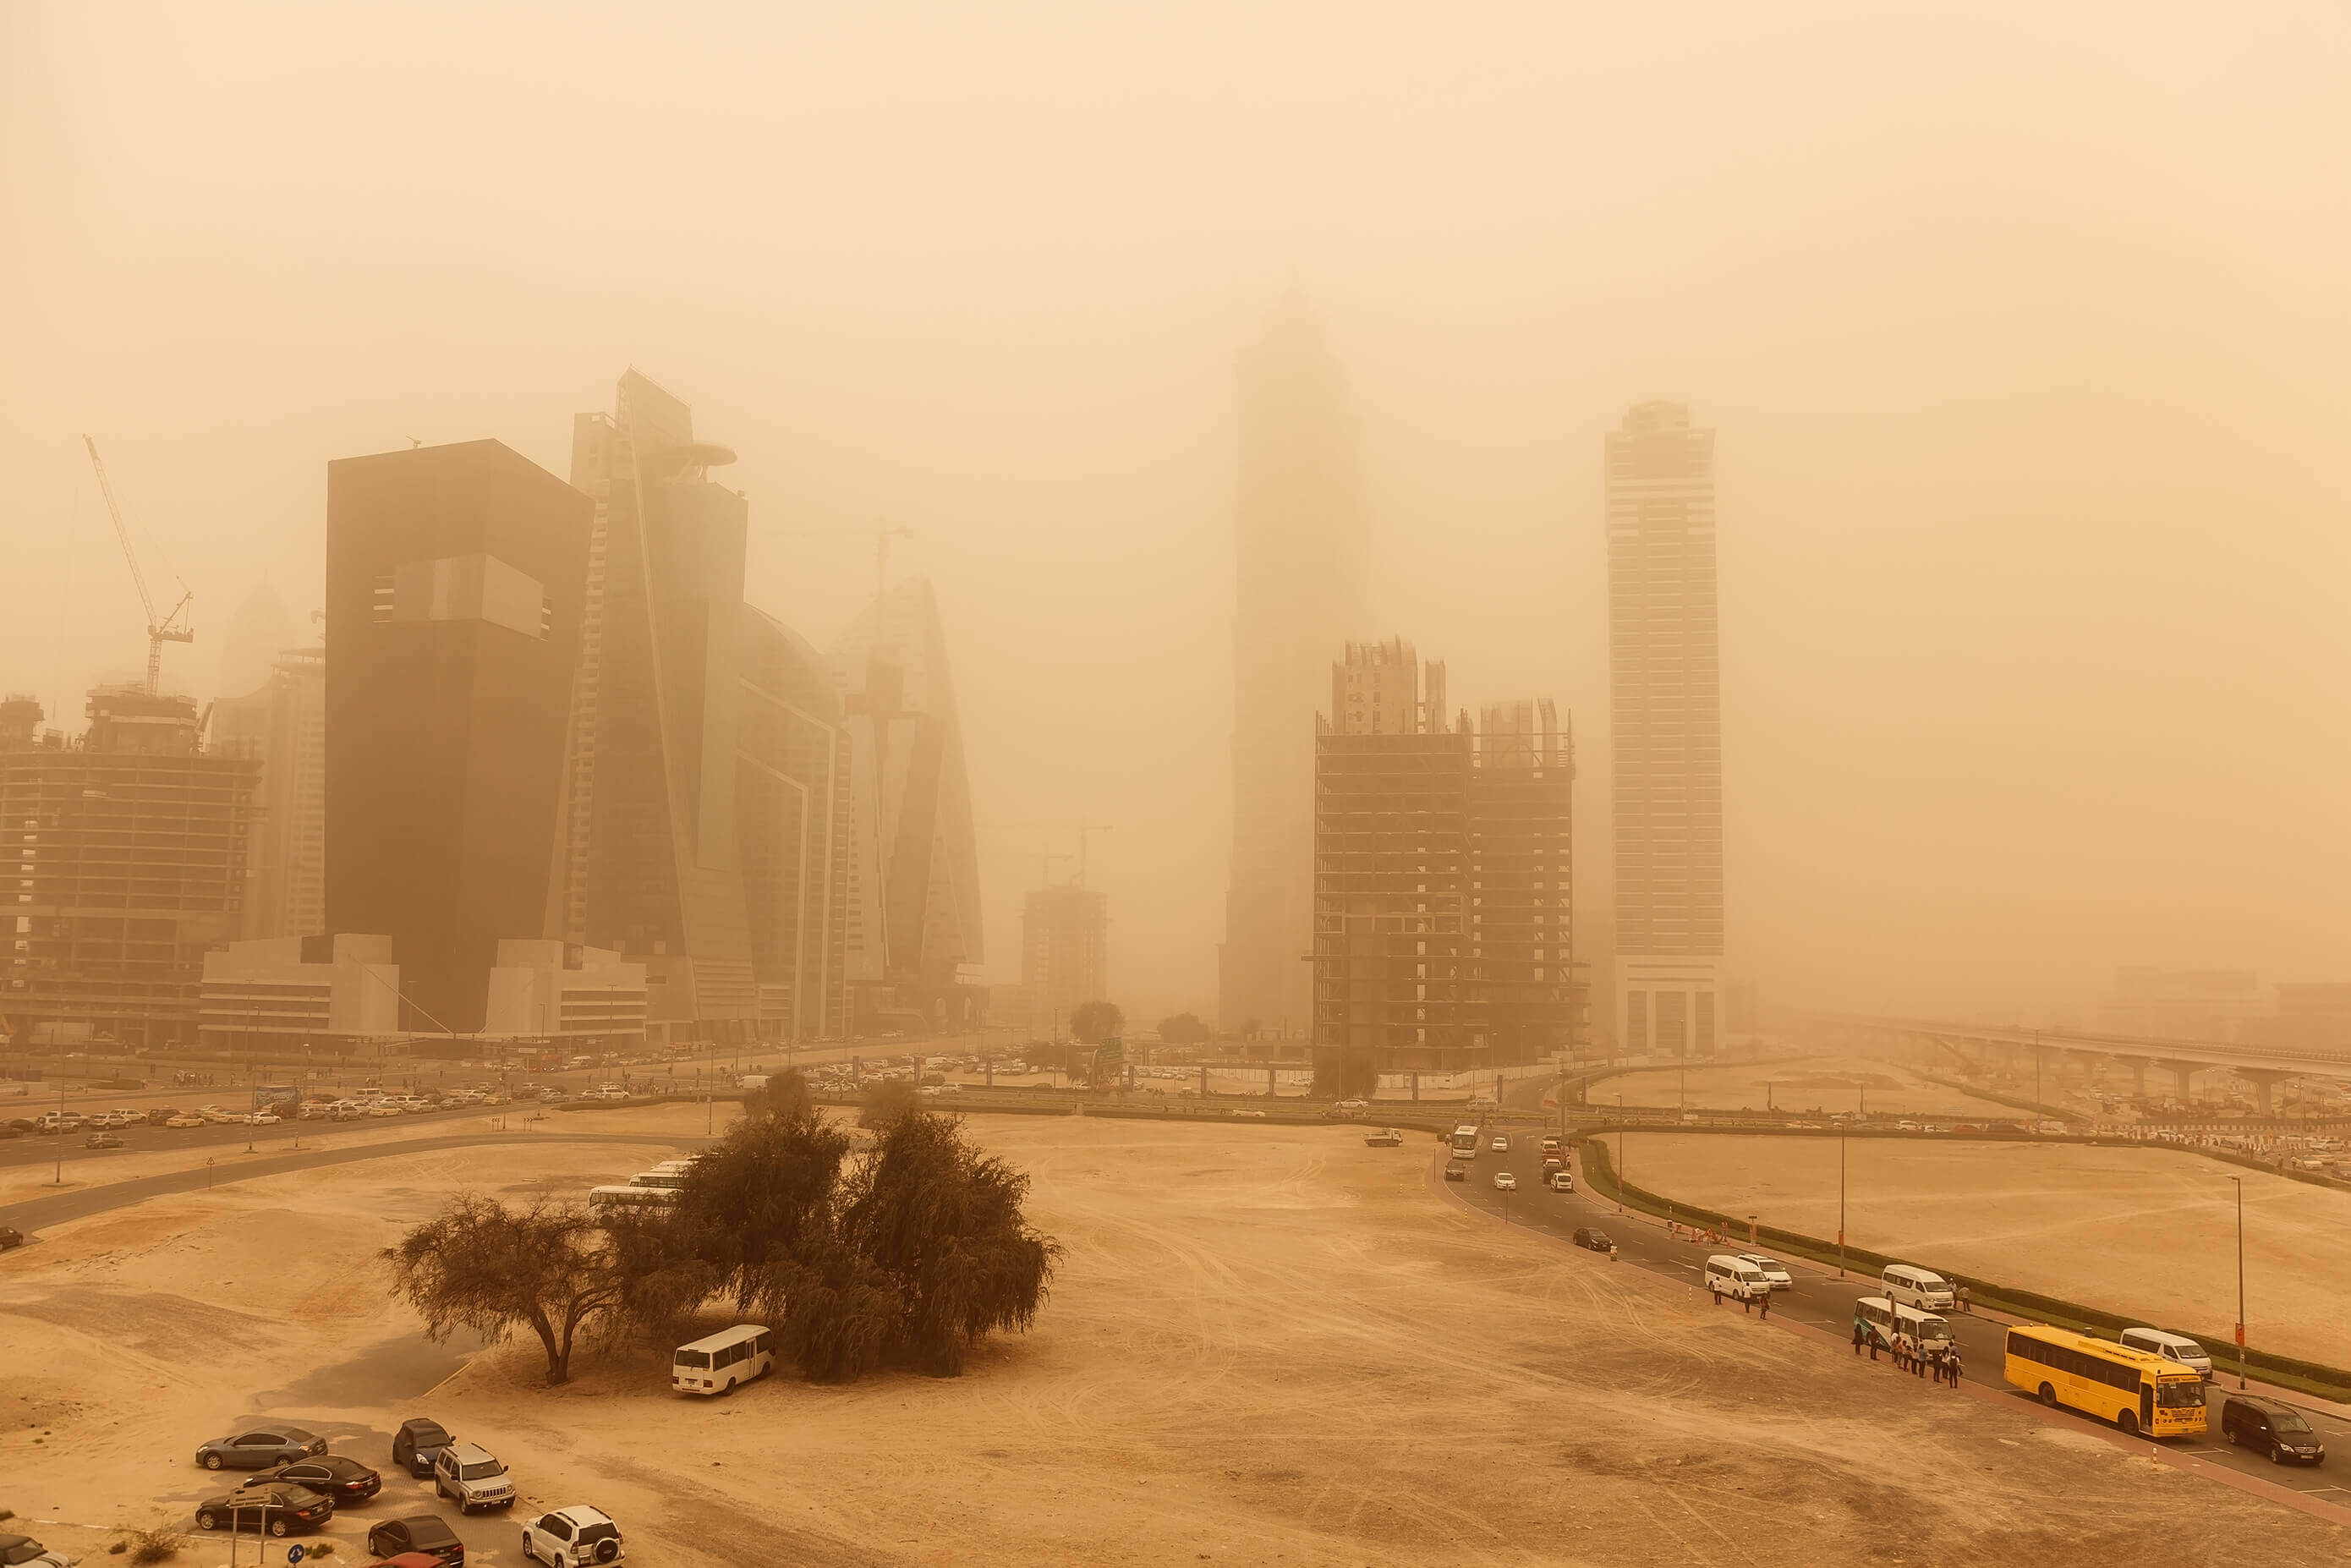 Why Did ‘Particle Pollution’ Increase in UAE as Roads Emptied during Pandemic?